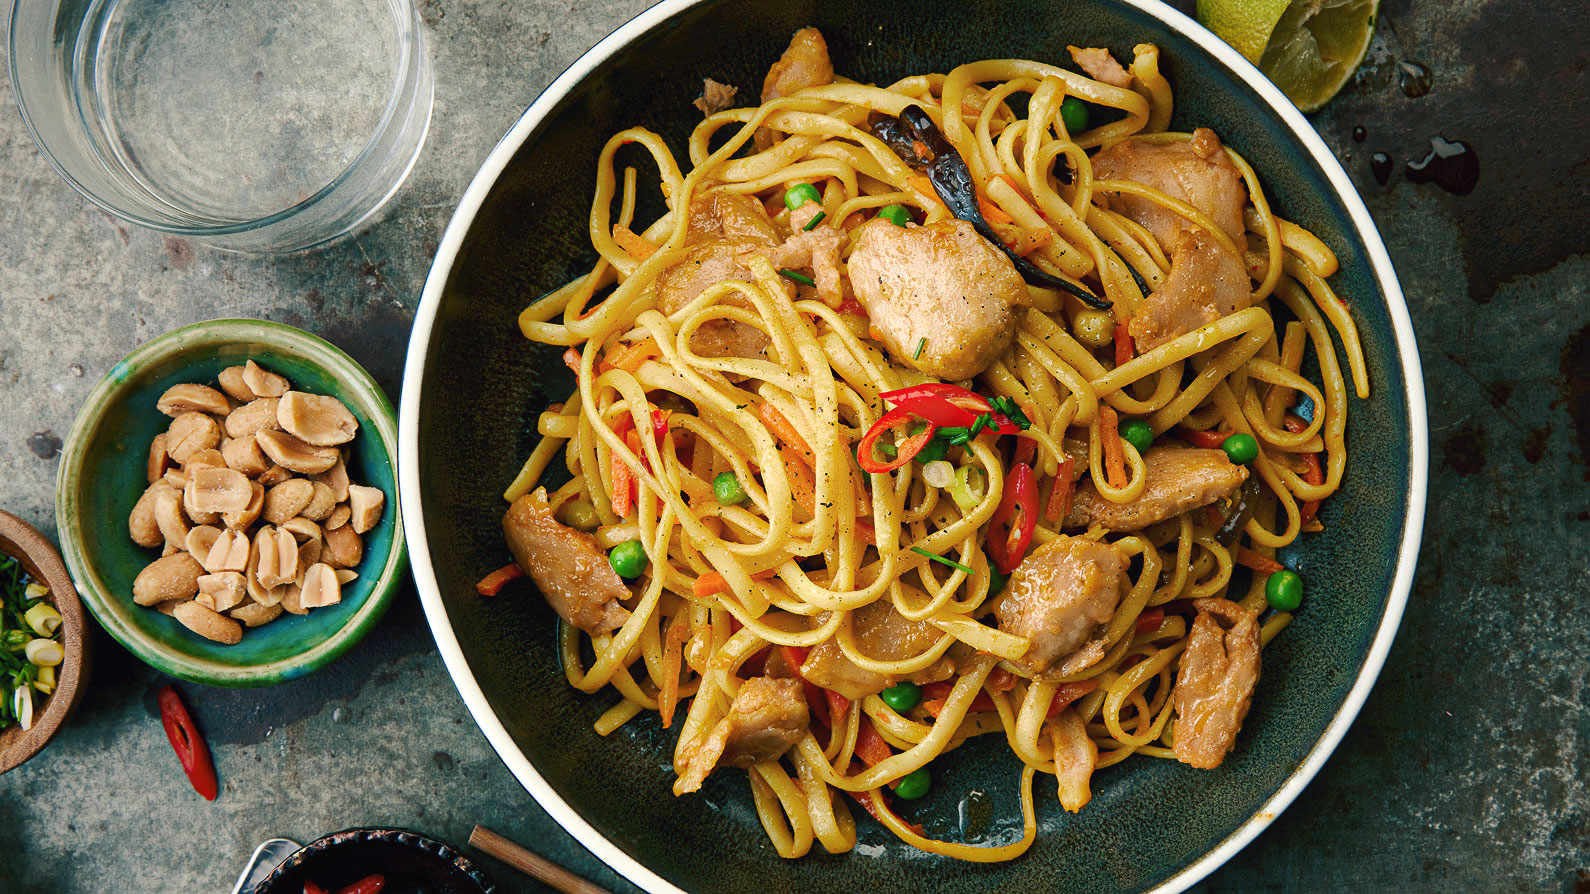 Stir-Fried Chick'n and Lo Mein